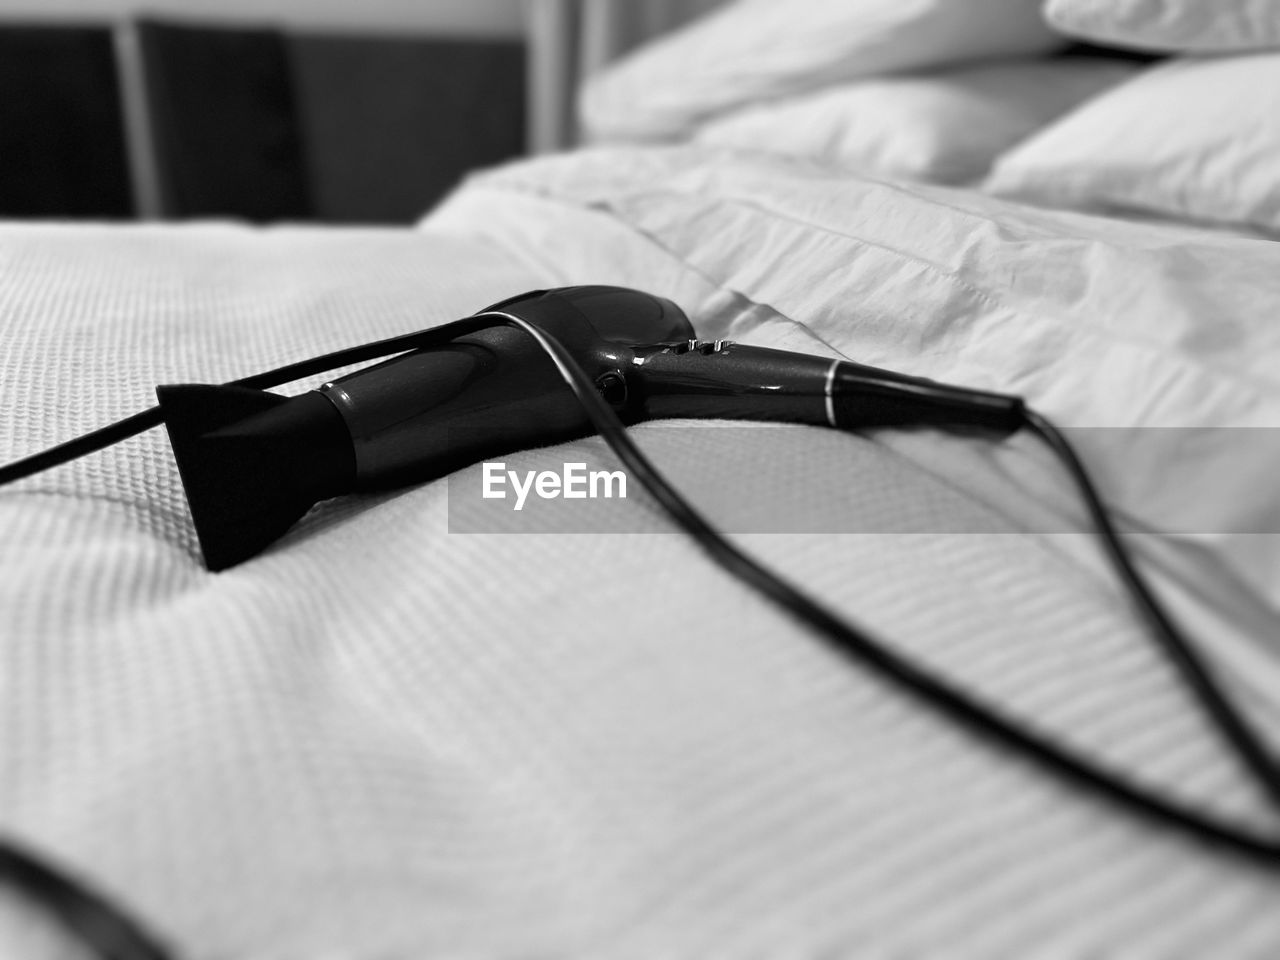 glasses, bed, indoors, furniture, black and white, bedroom, selective focus, eyewear, close-up, vision care, monochrome photography, white, no people, black, pen, monochrome, still life, linen, eyeglasses, focus on foreground, domestic room, sheet